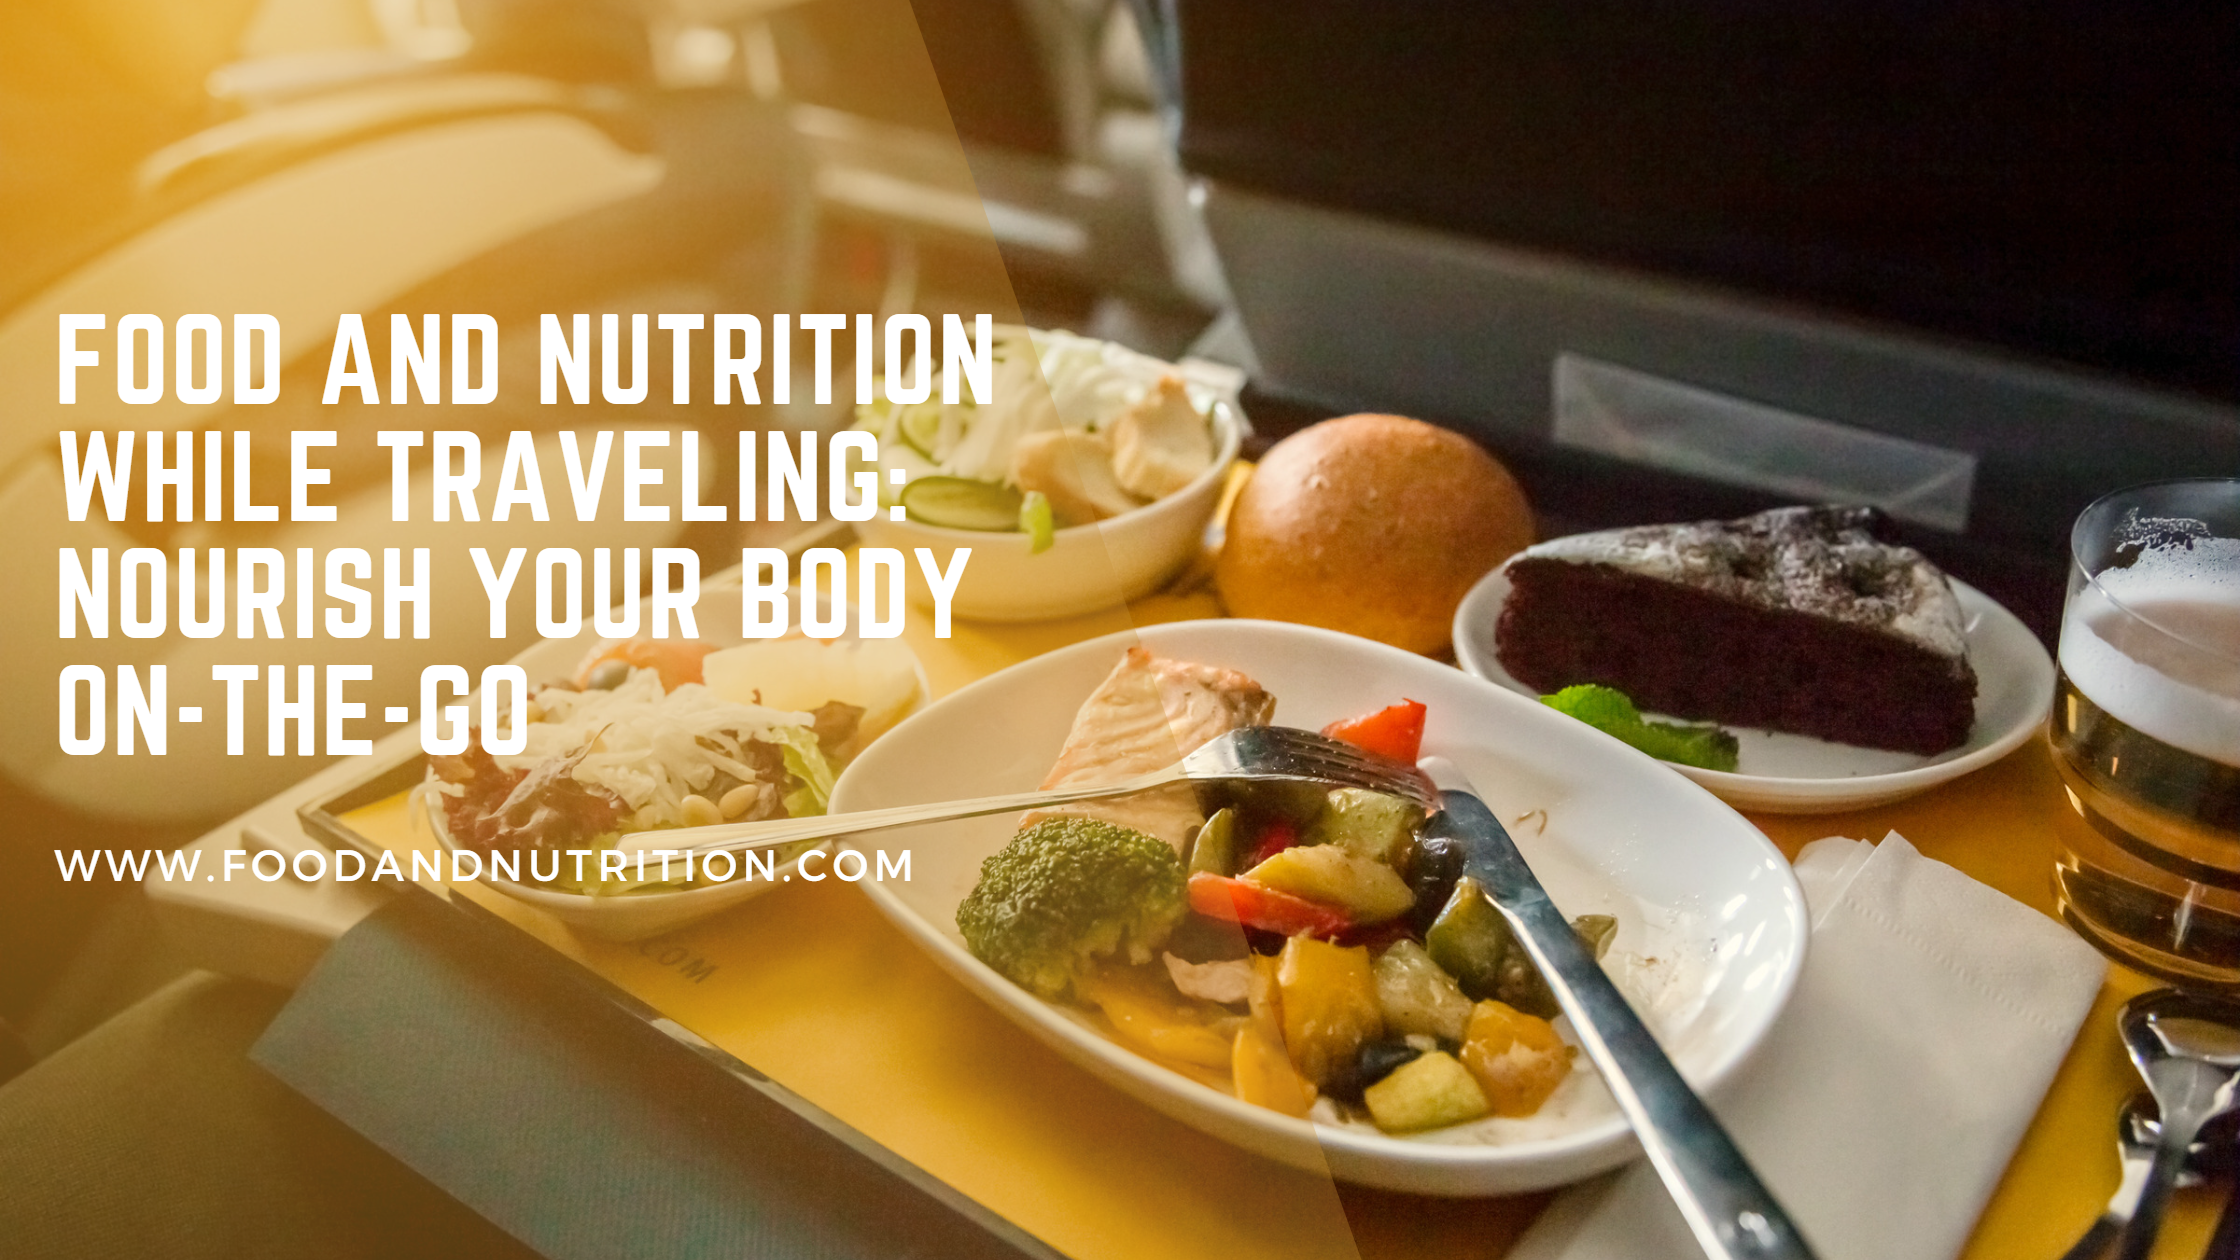 Food and Nutrition While Traveling: Nourish Your Body On-the-Go